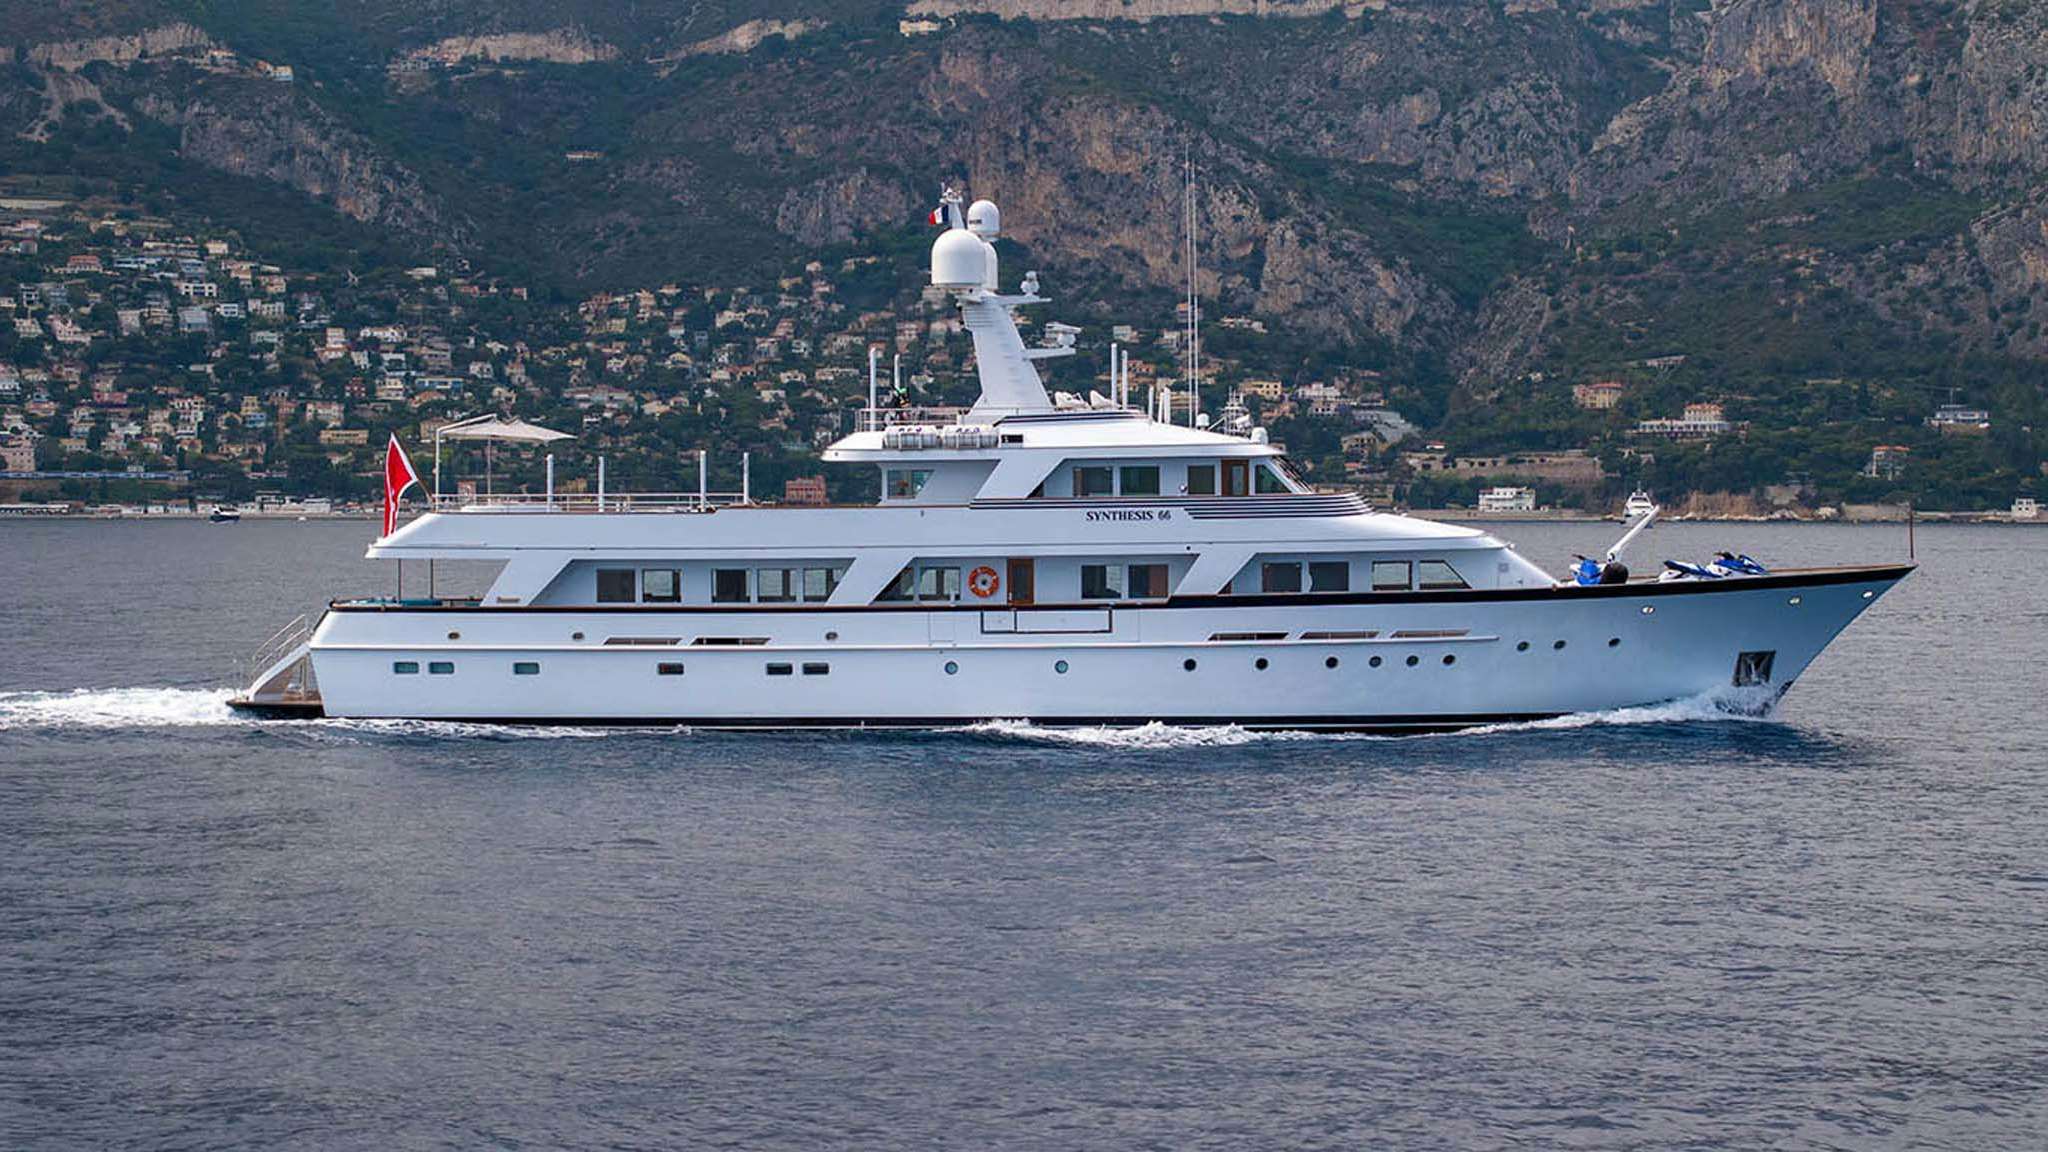 Watch Video for SYNTHESIS 66 Yacht for Charter